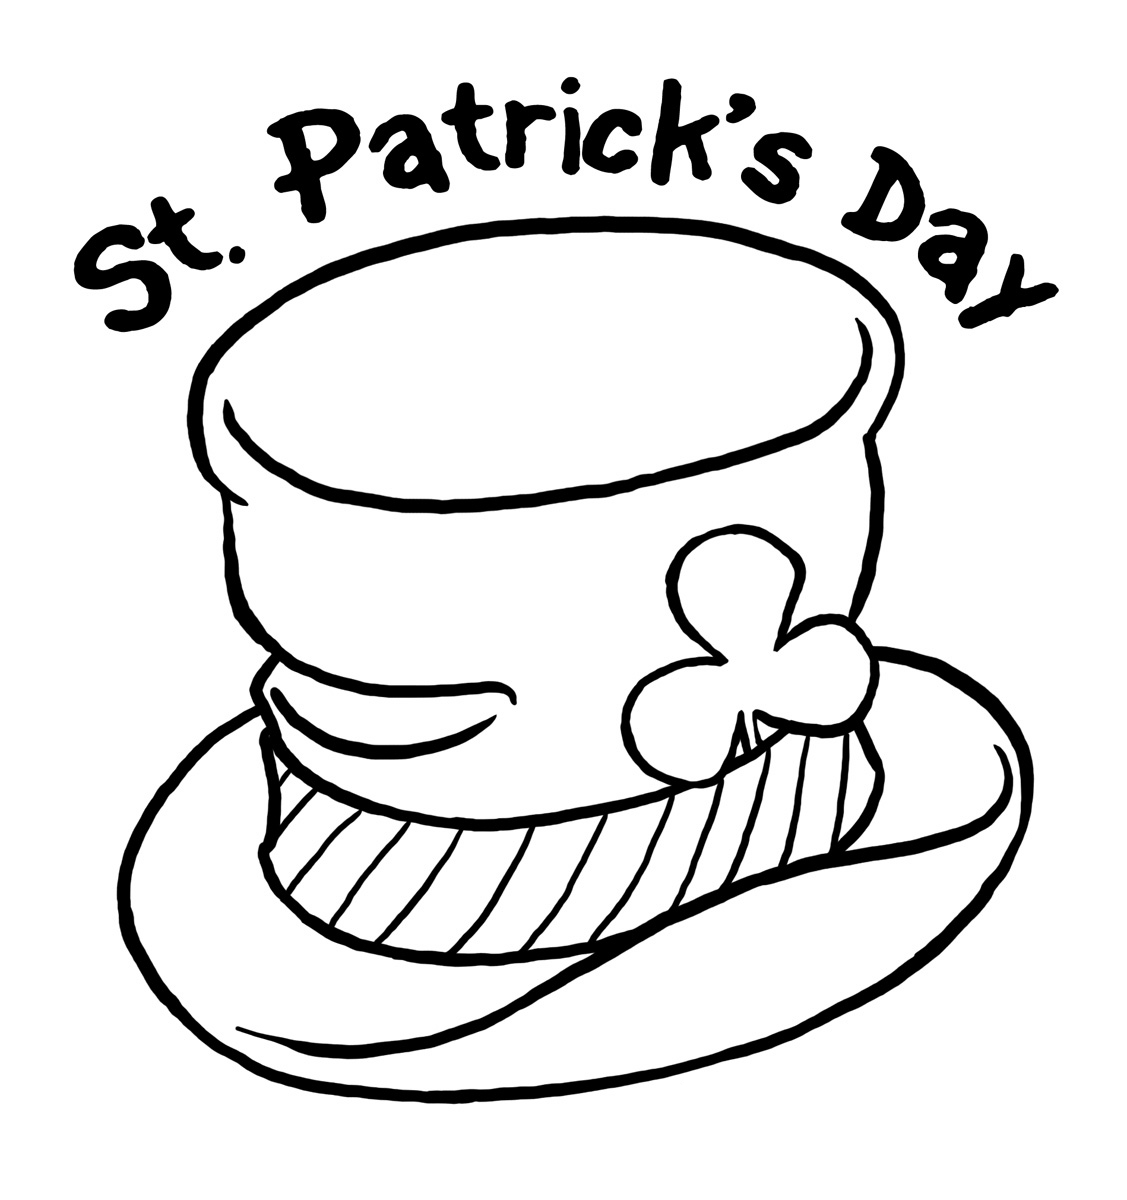 St Patricks Day Coloring Pages | St. Patrick&amp;#039;s Day Coloring Pages - Free Printable Saint Patrick Coloring Pages